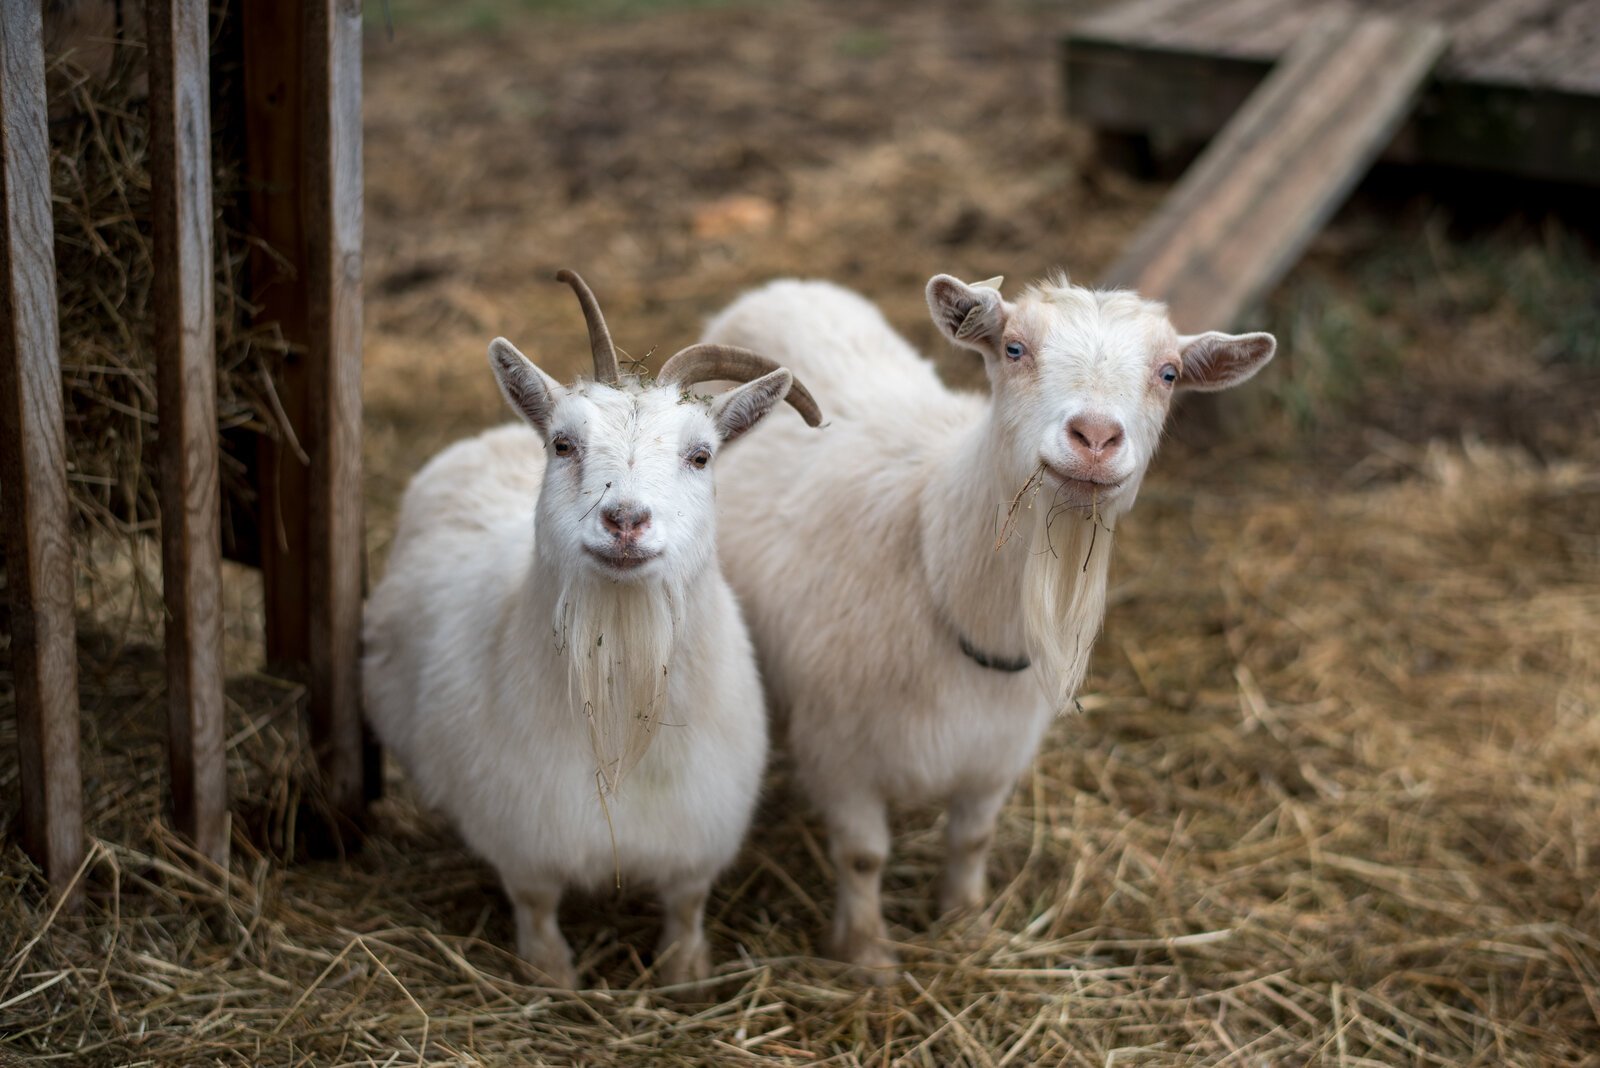 Animals on the farm include sheep, goats, ducks, chickens, alpaca, and rabbits. 